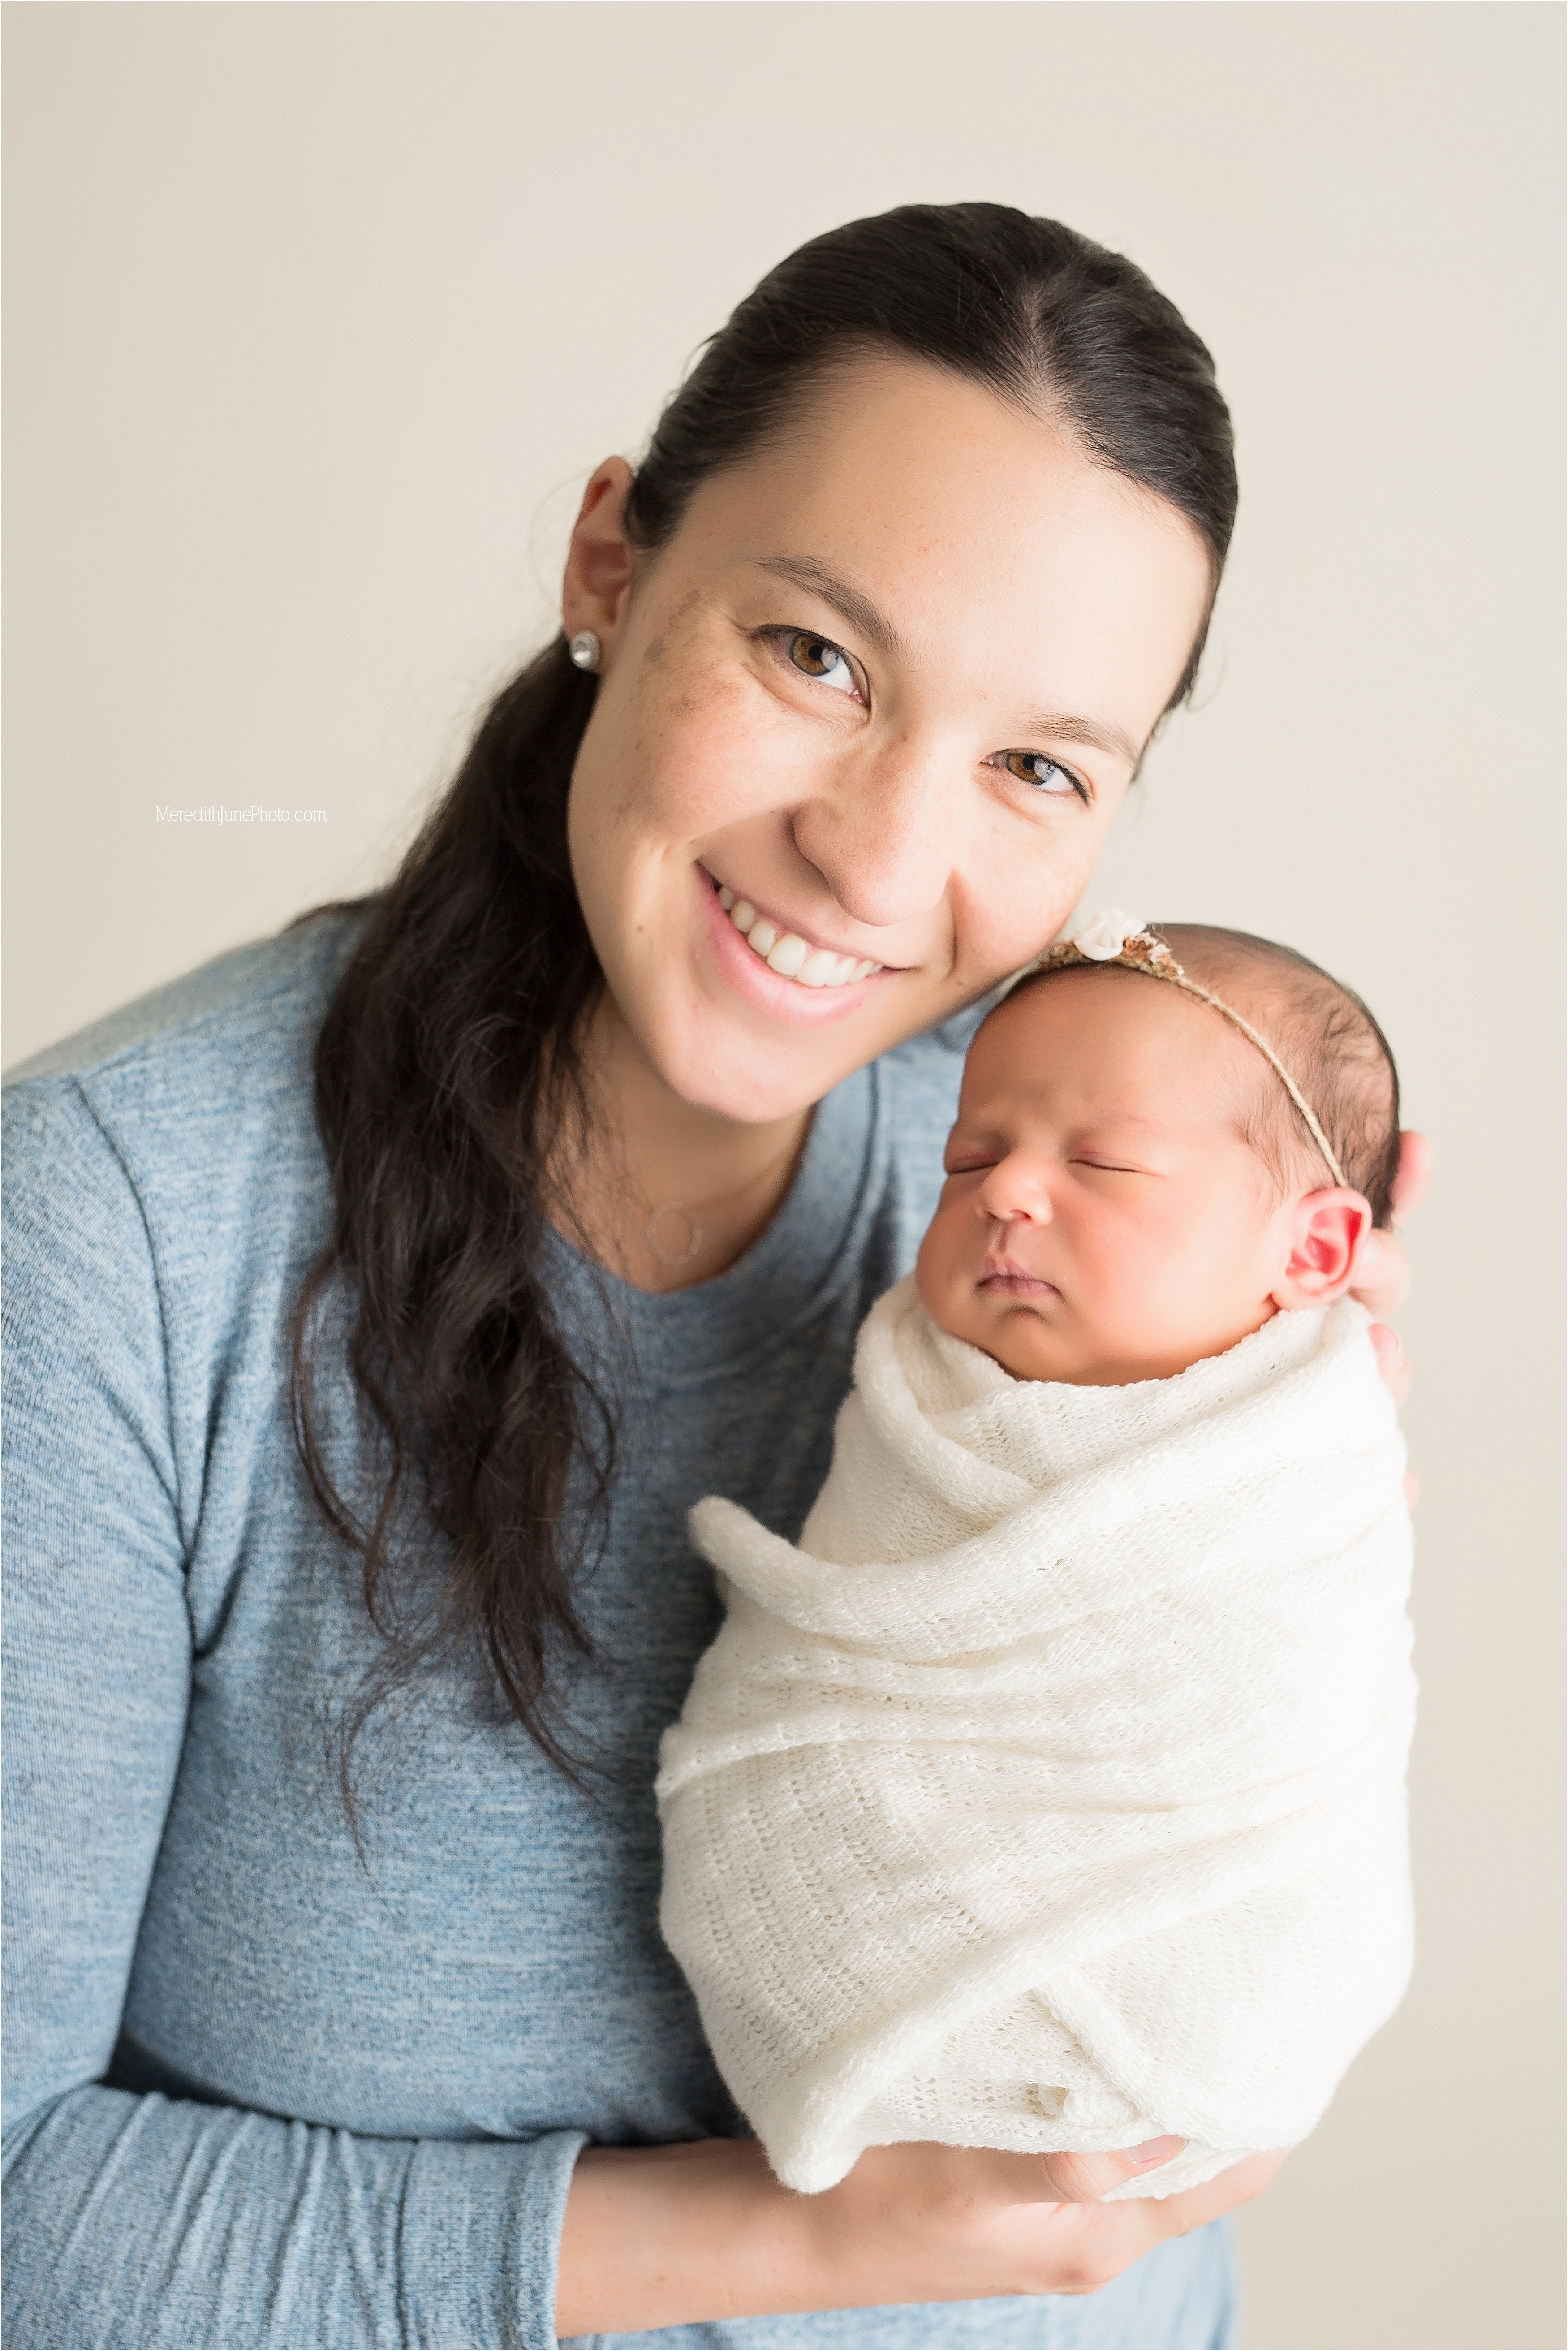 Baby Danielle with mom during newborn session